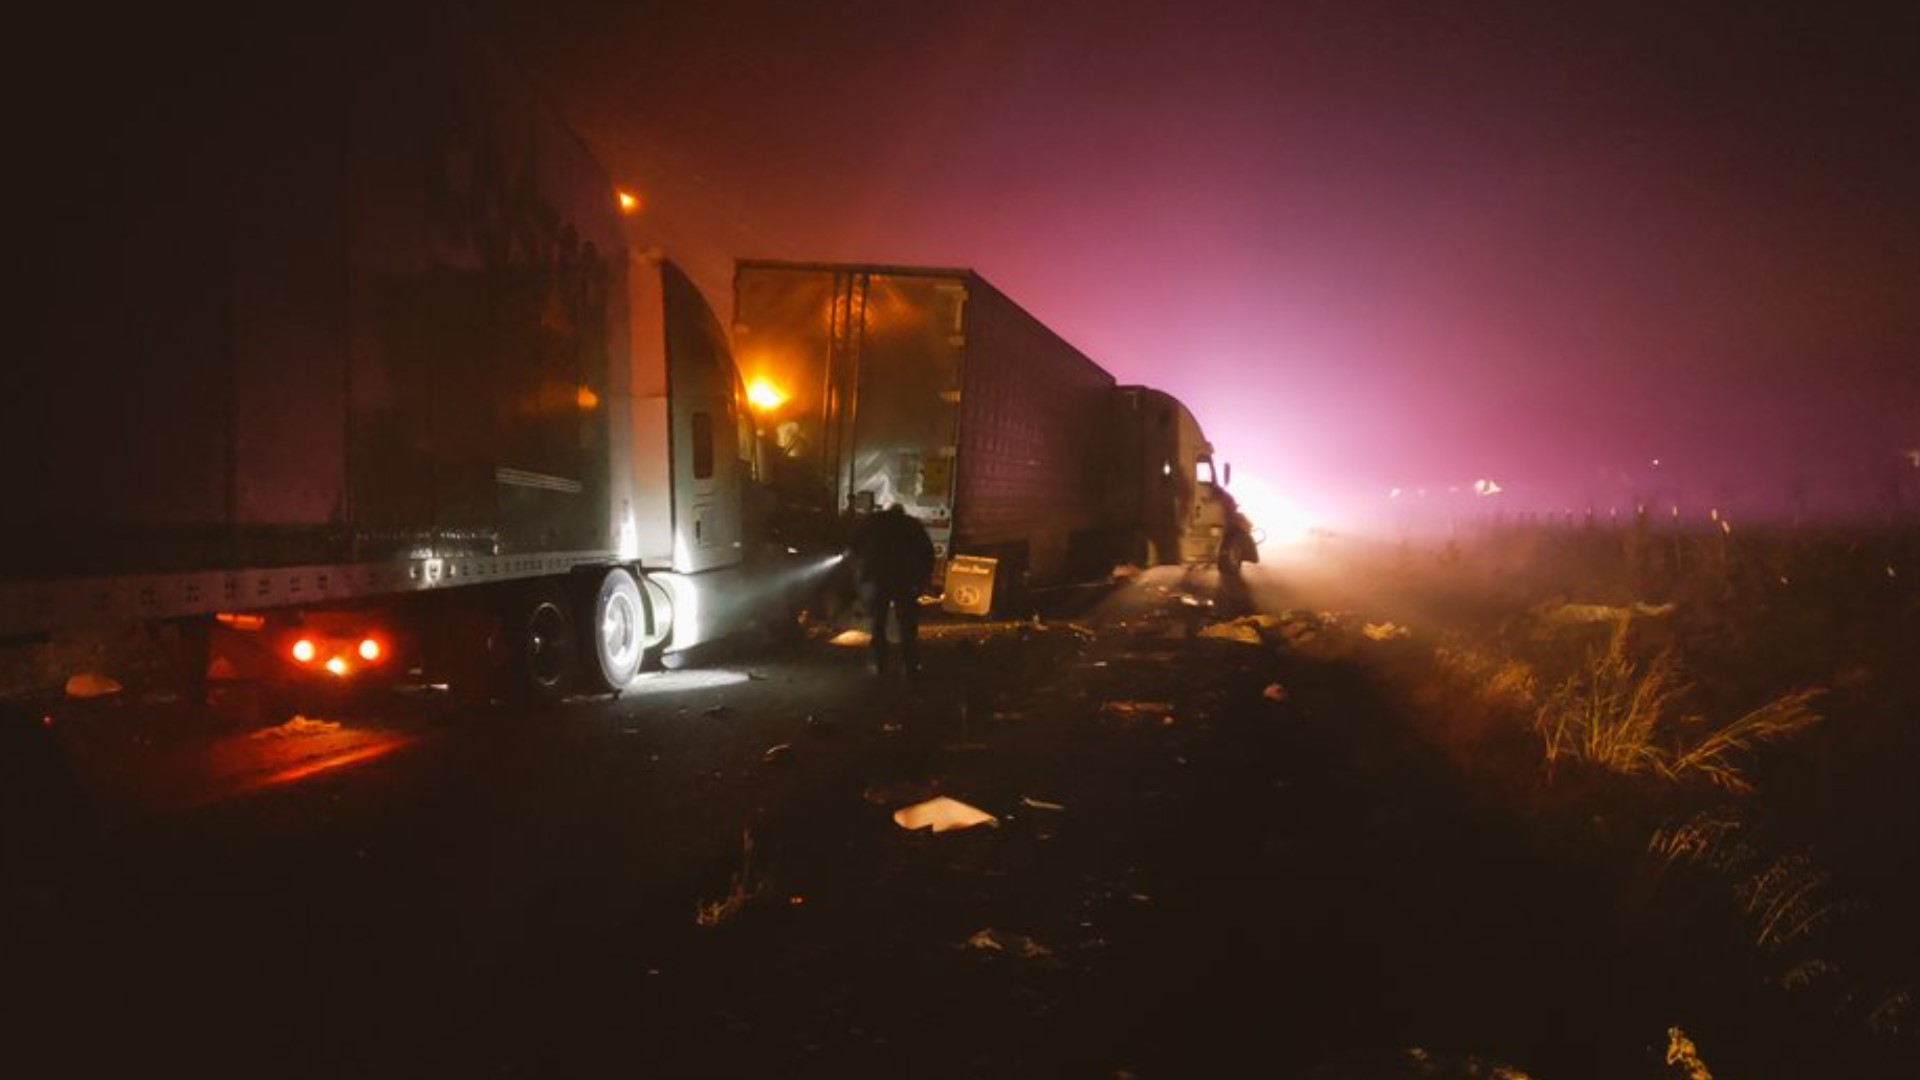 At least five big rigs and five other vehicles were involved in an early-morning traffic collision Saturday, the Butte County Fire Department said.